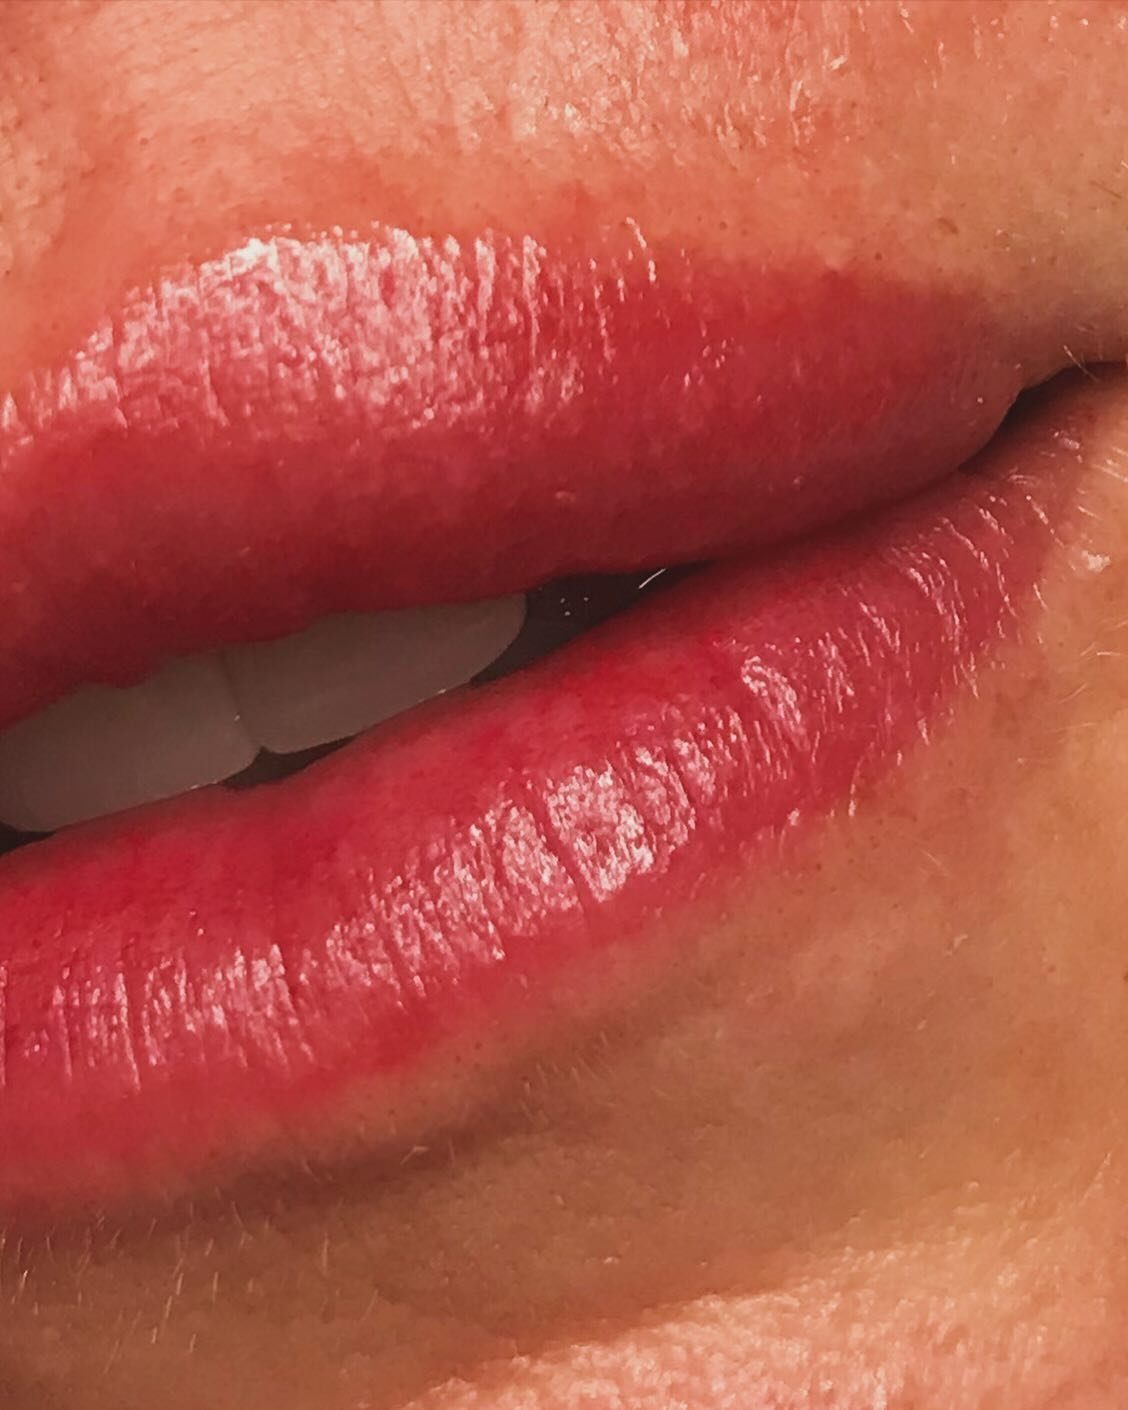 Soft Contour Lip Blush. 
Of course! Here they are without numbering:

#LipBlushing
#LipBlush
#SoftContourLips
#CosmeticTattoo
#PermanentMakeup
#LipTattoo
#NaturalLips
#BeautyInk
#EnhanceYourSmile